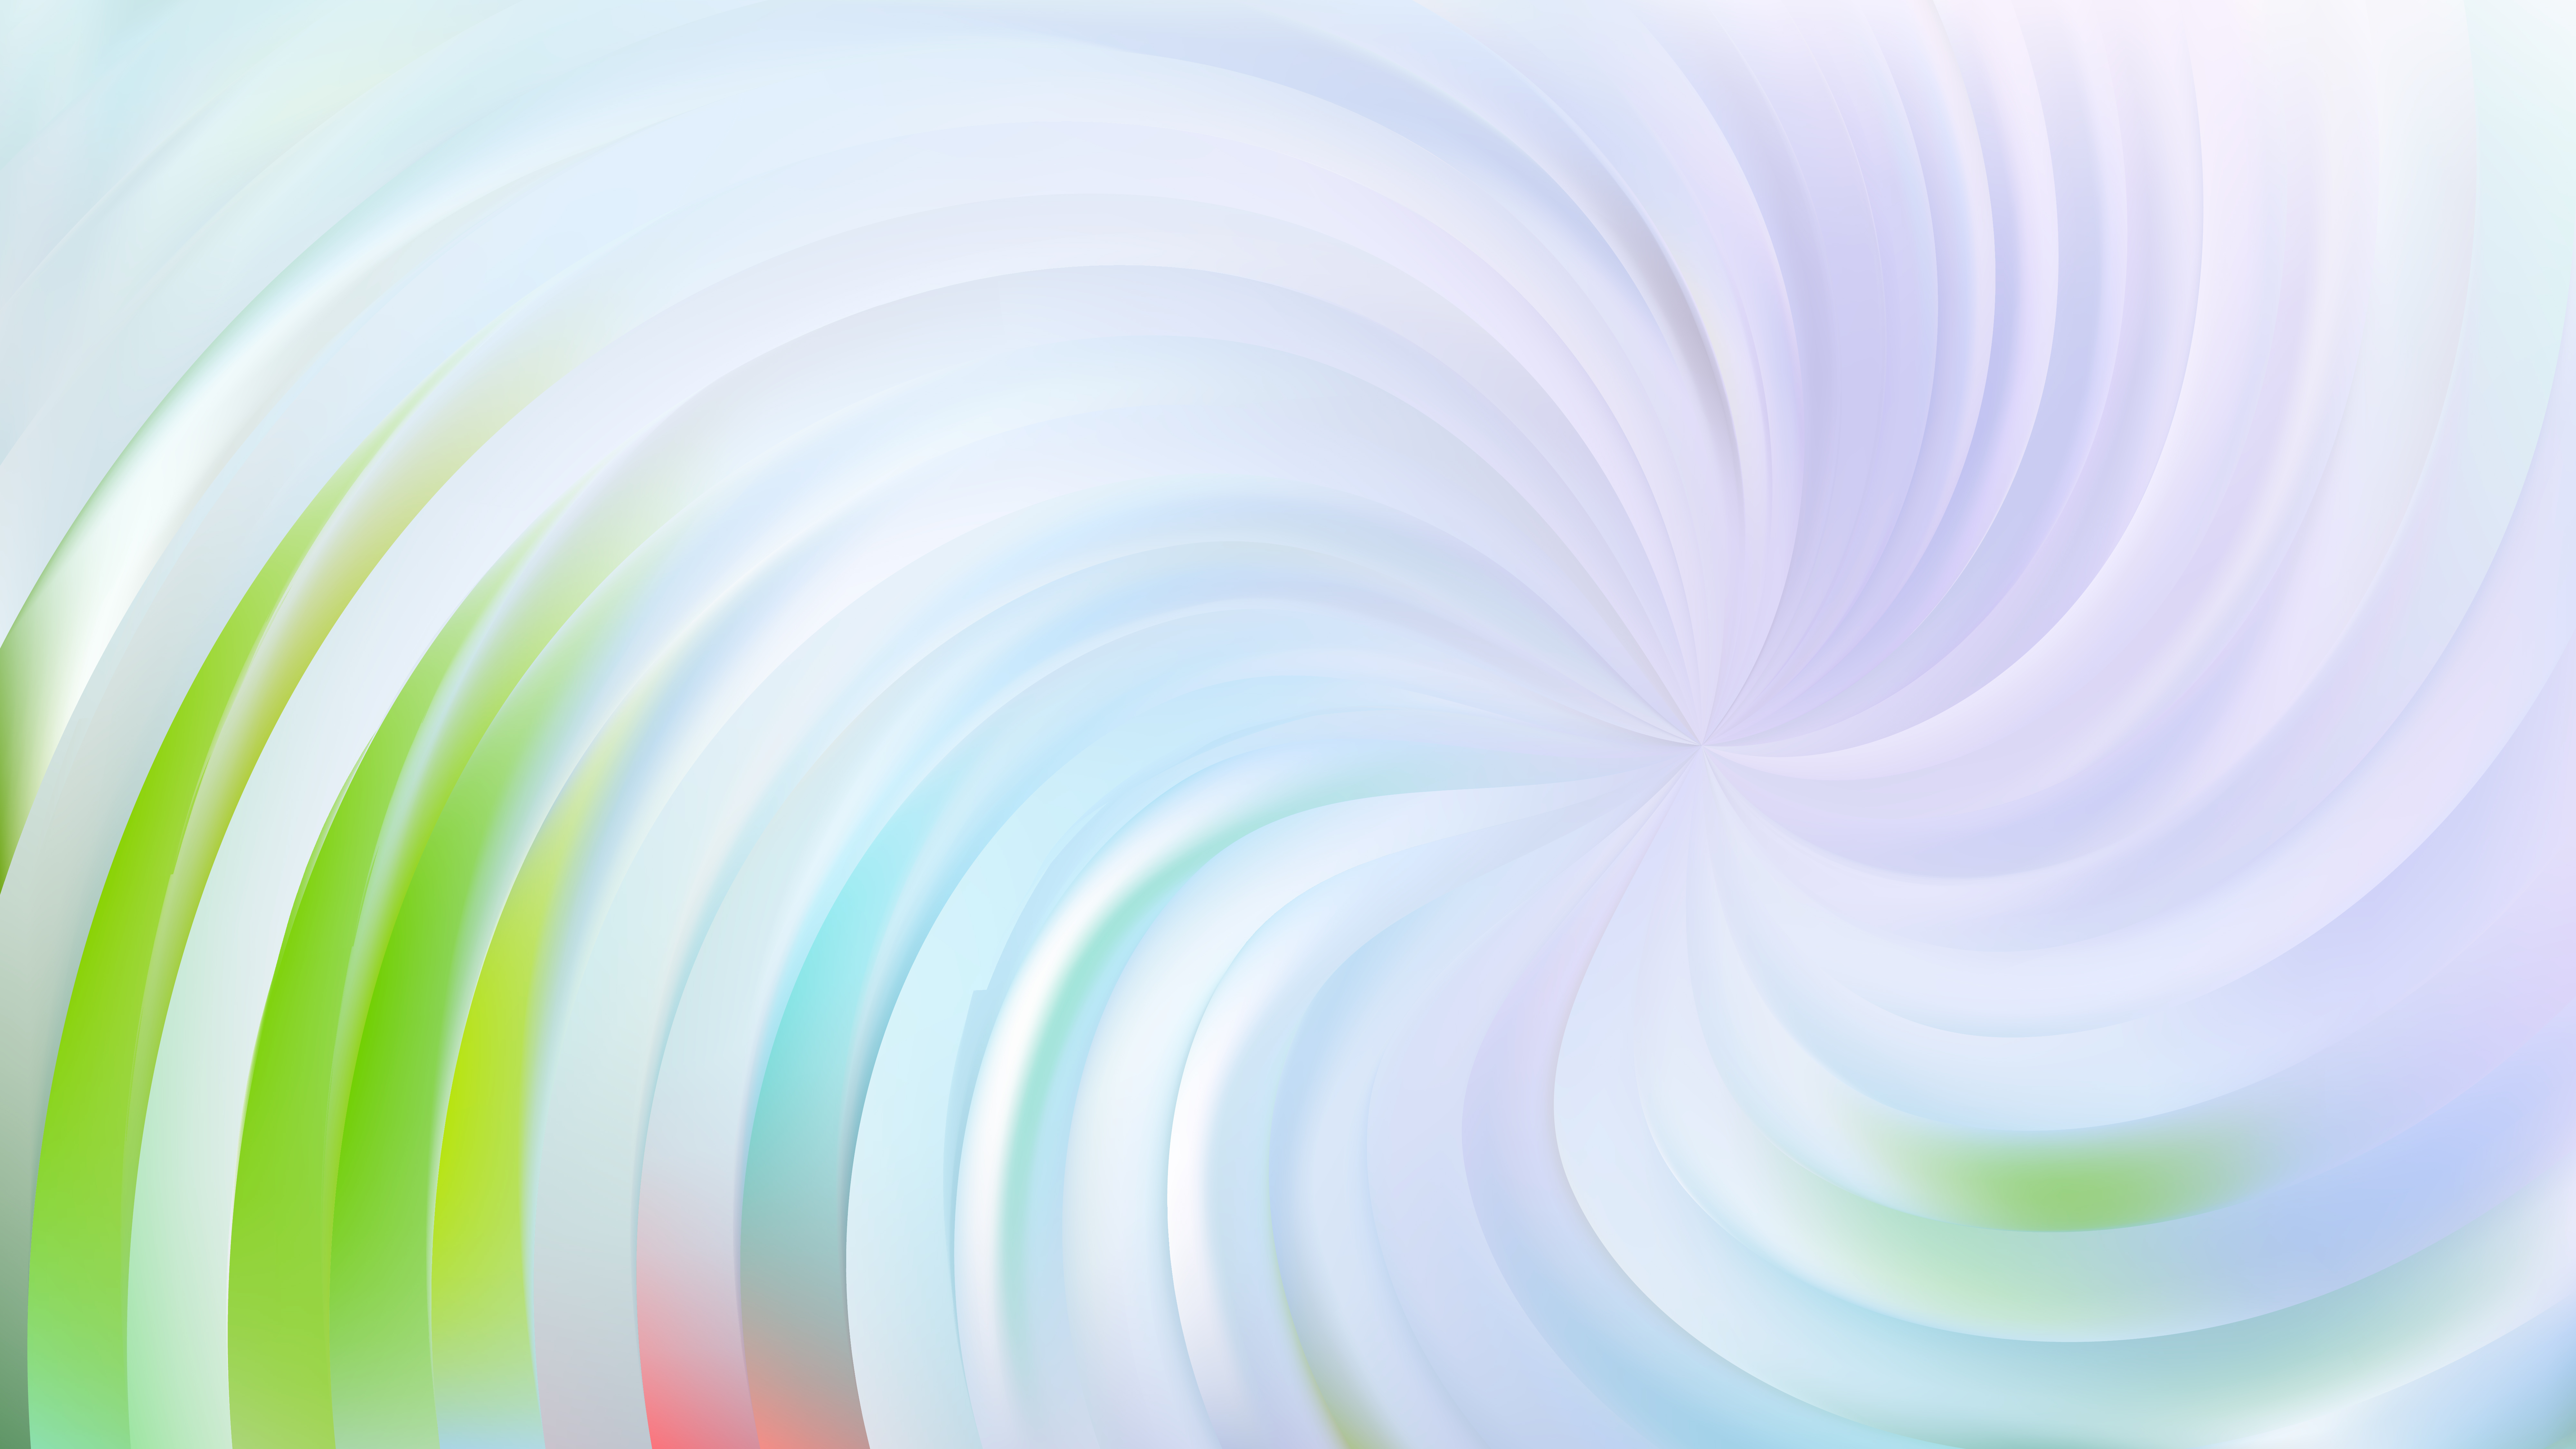 Free Abstract Light Color Swirl Background Vector Art